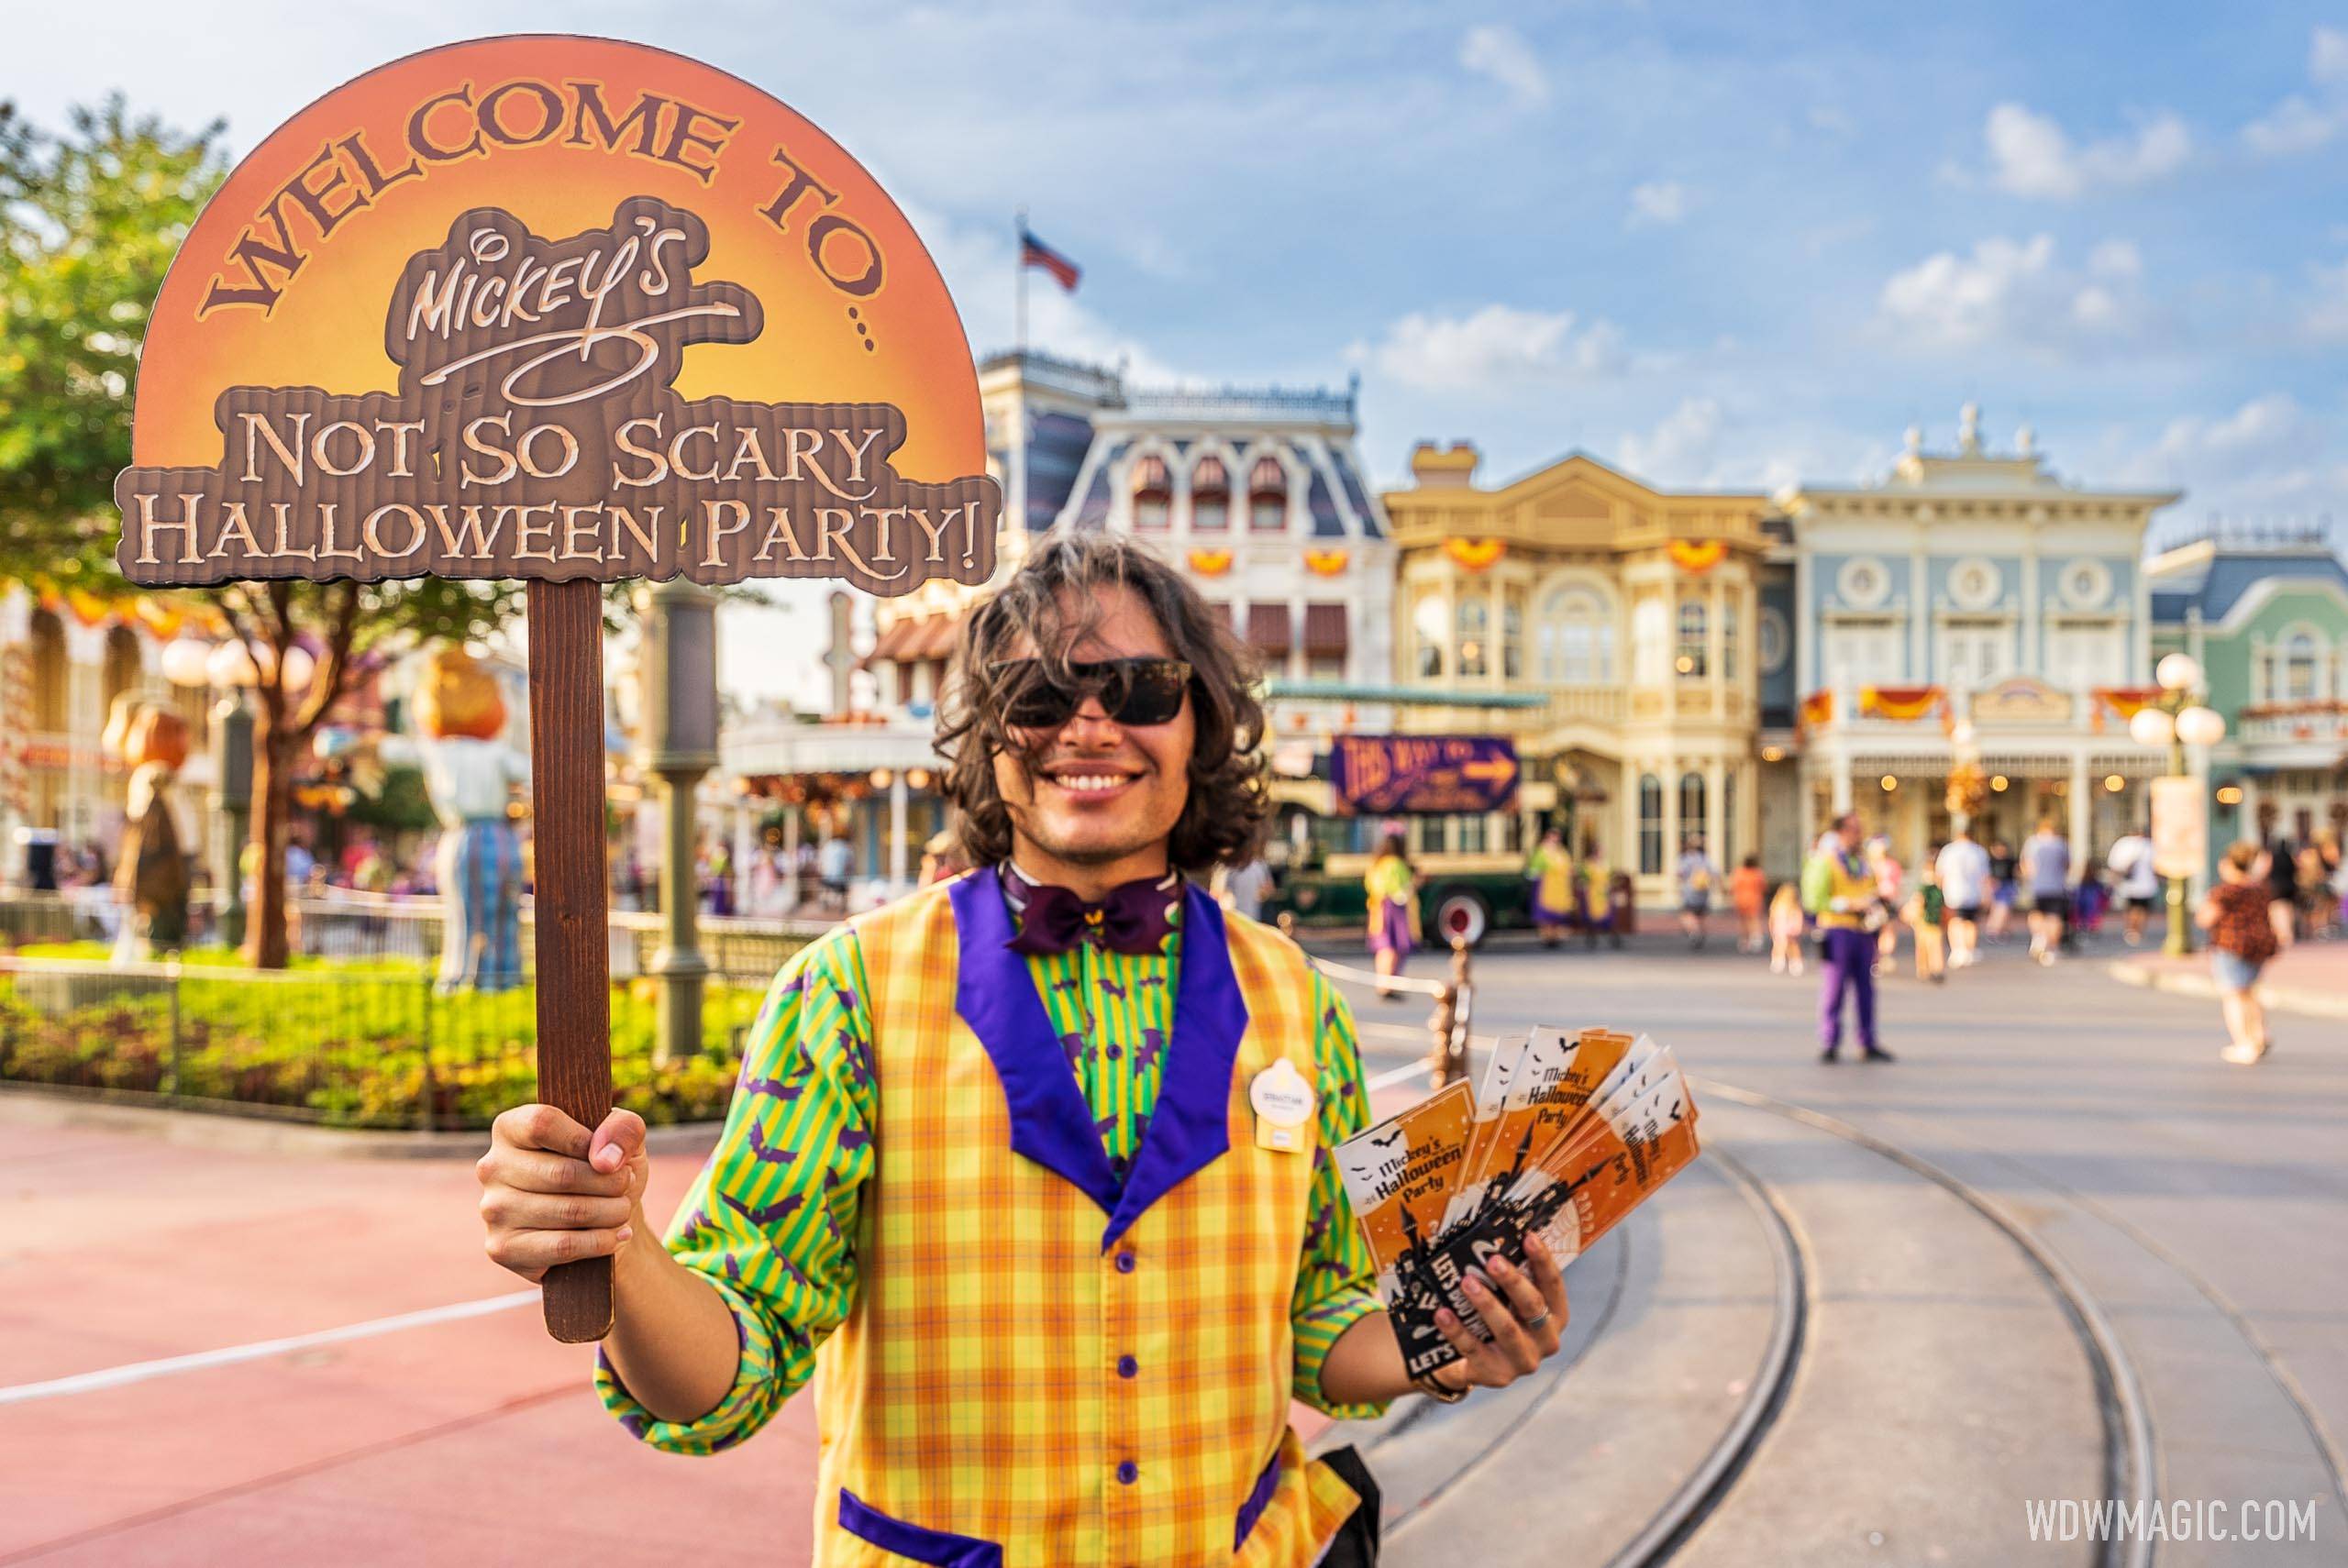 Tickets available today at Disney World Guest Relations for tonight's Mickey's Not-So-Scary Halloween Party